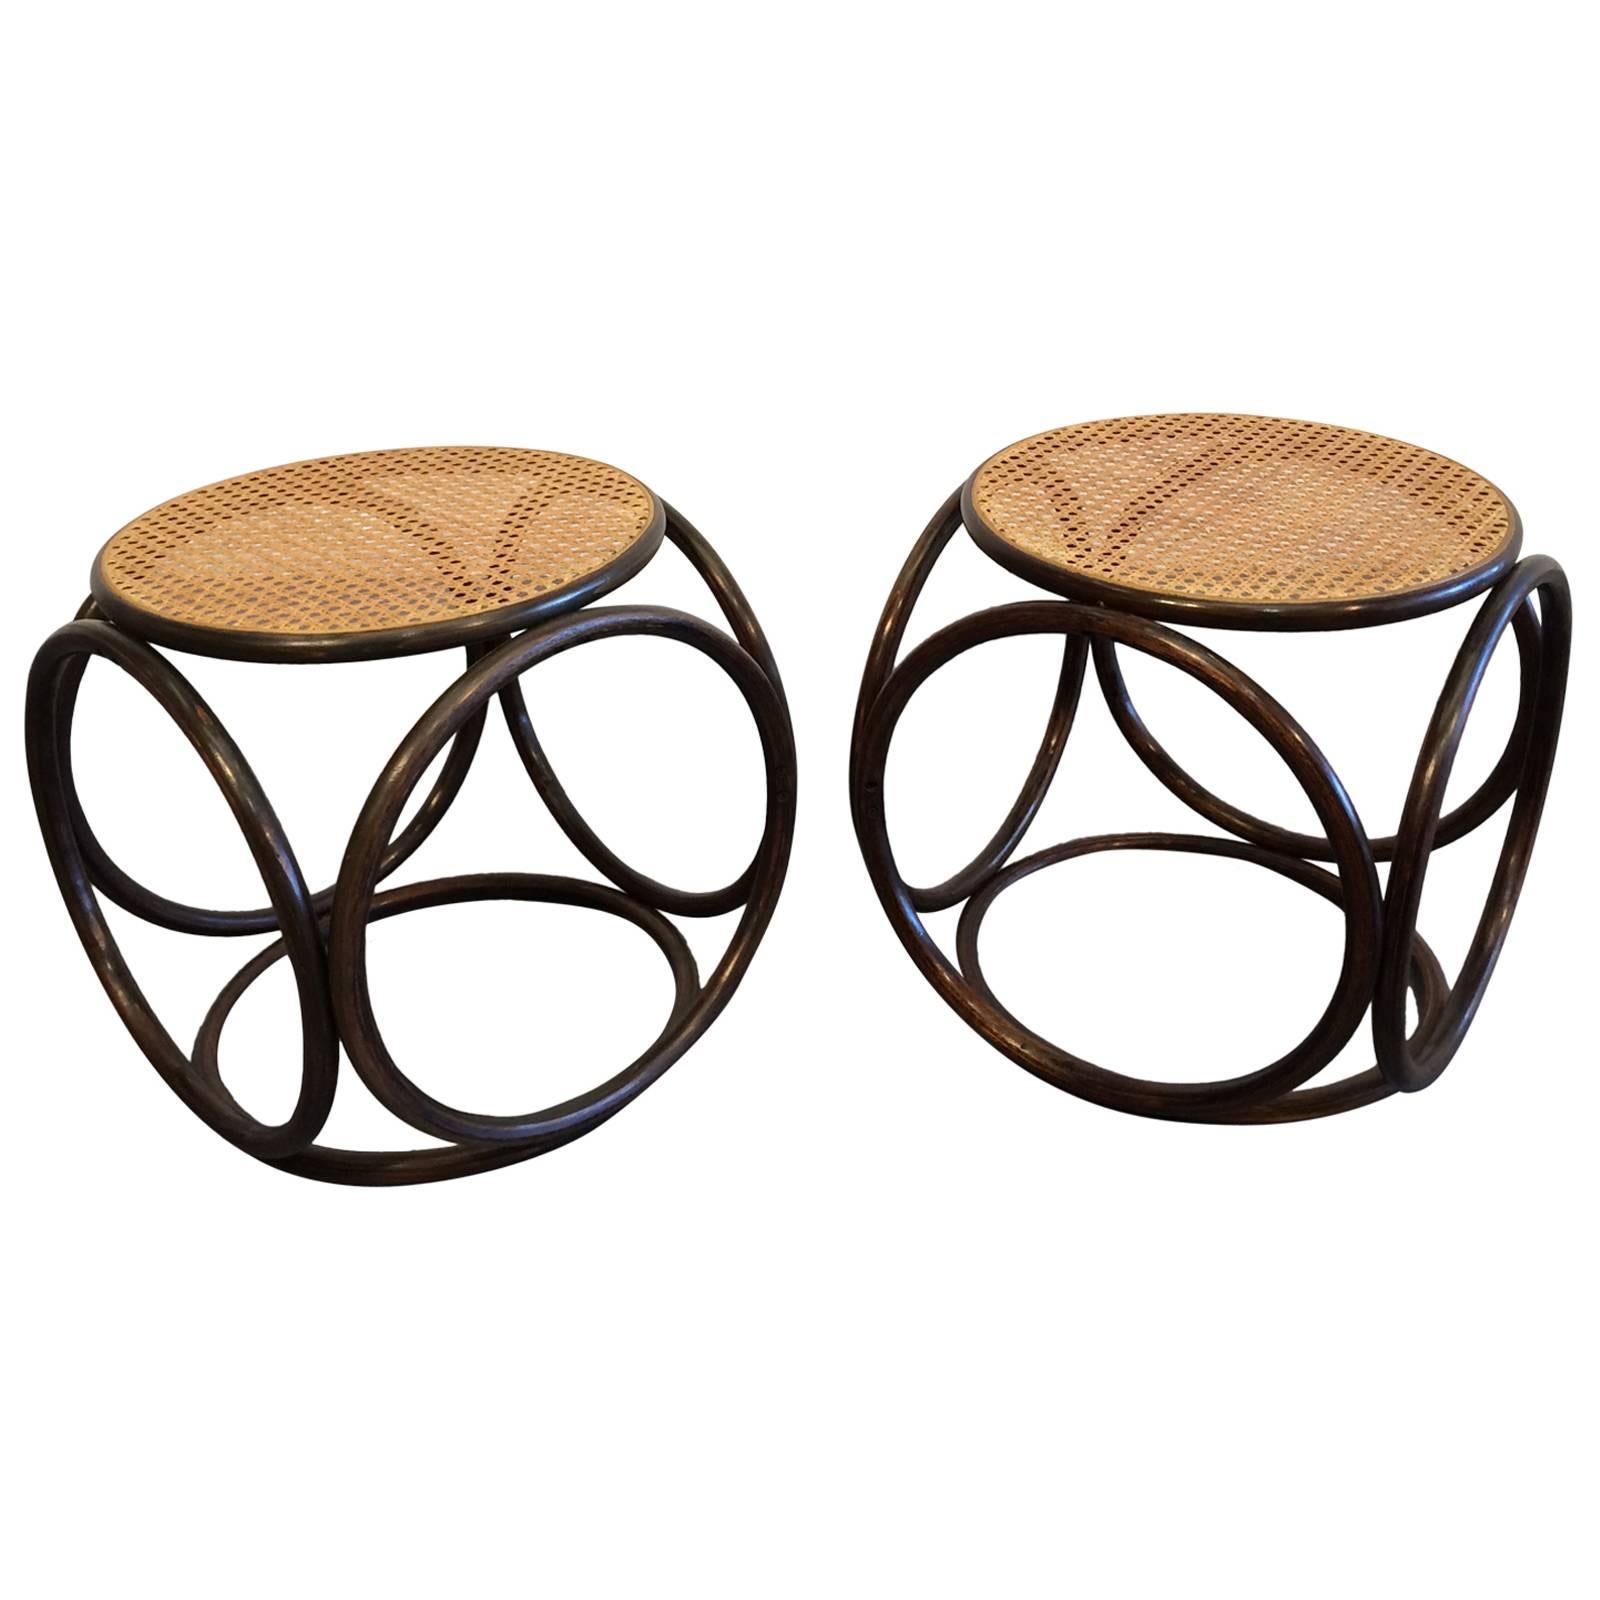 Pair of Beautiful Michael Thonet Stools or Ottomans